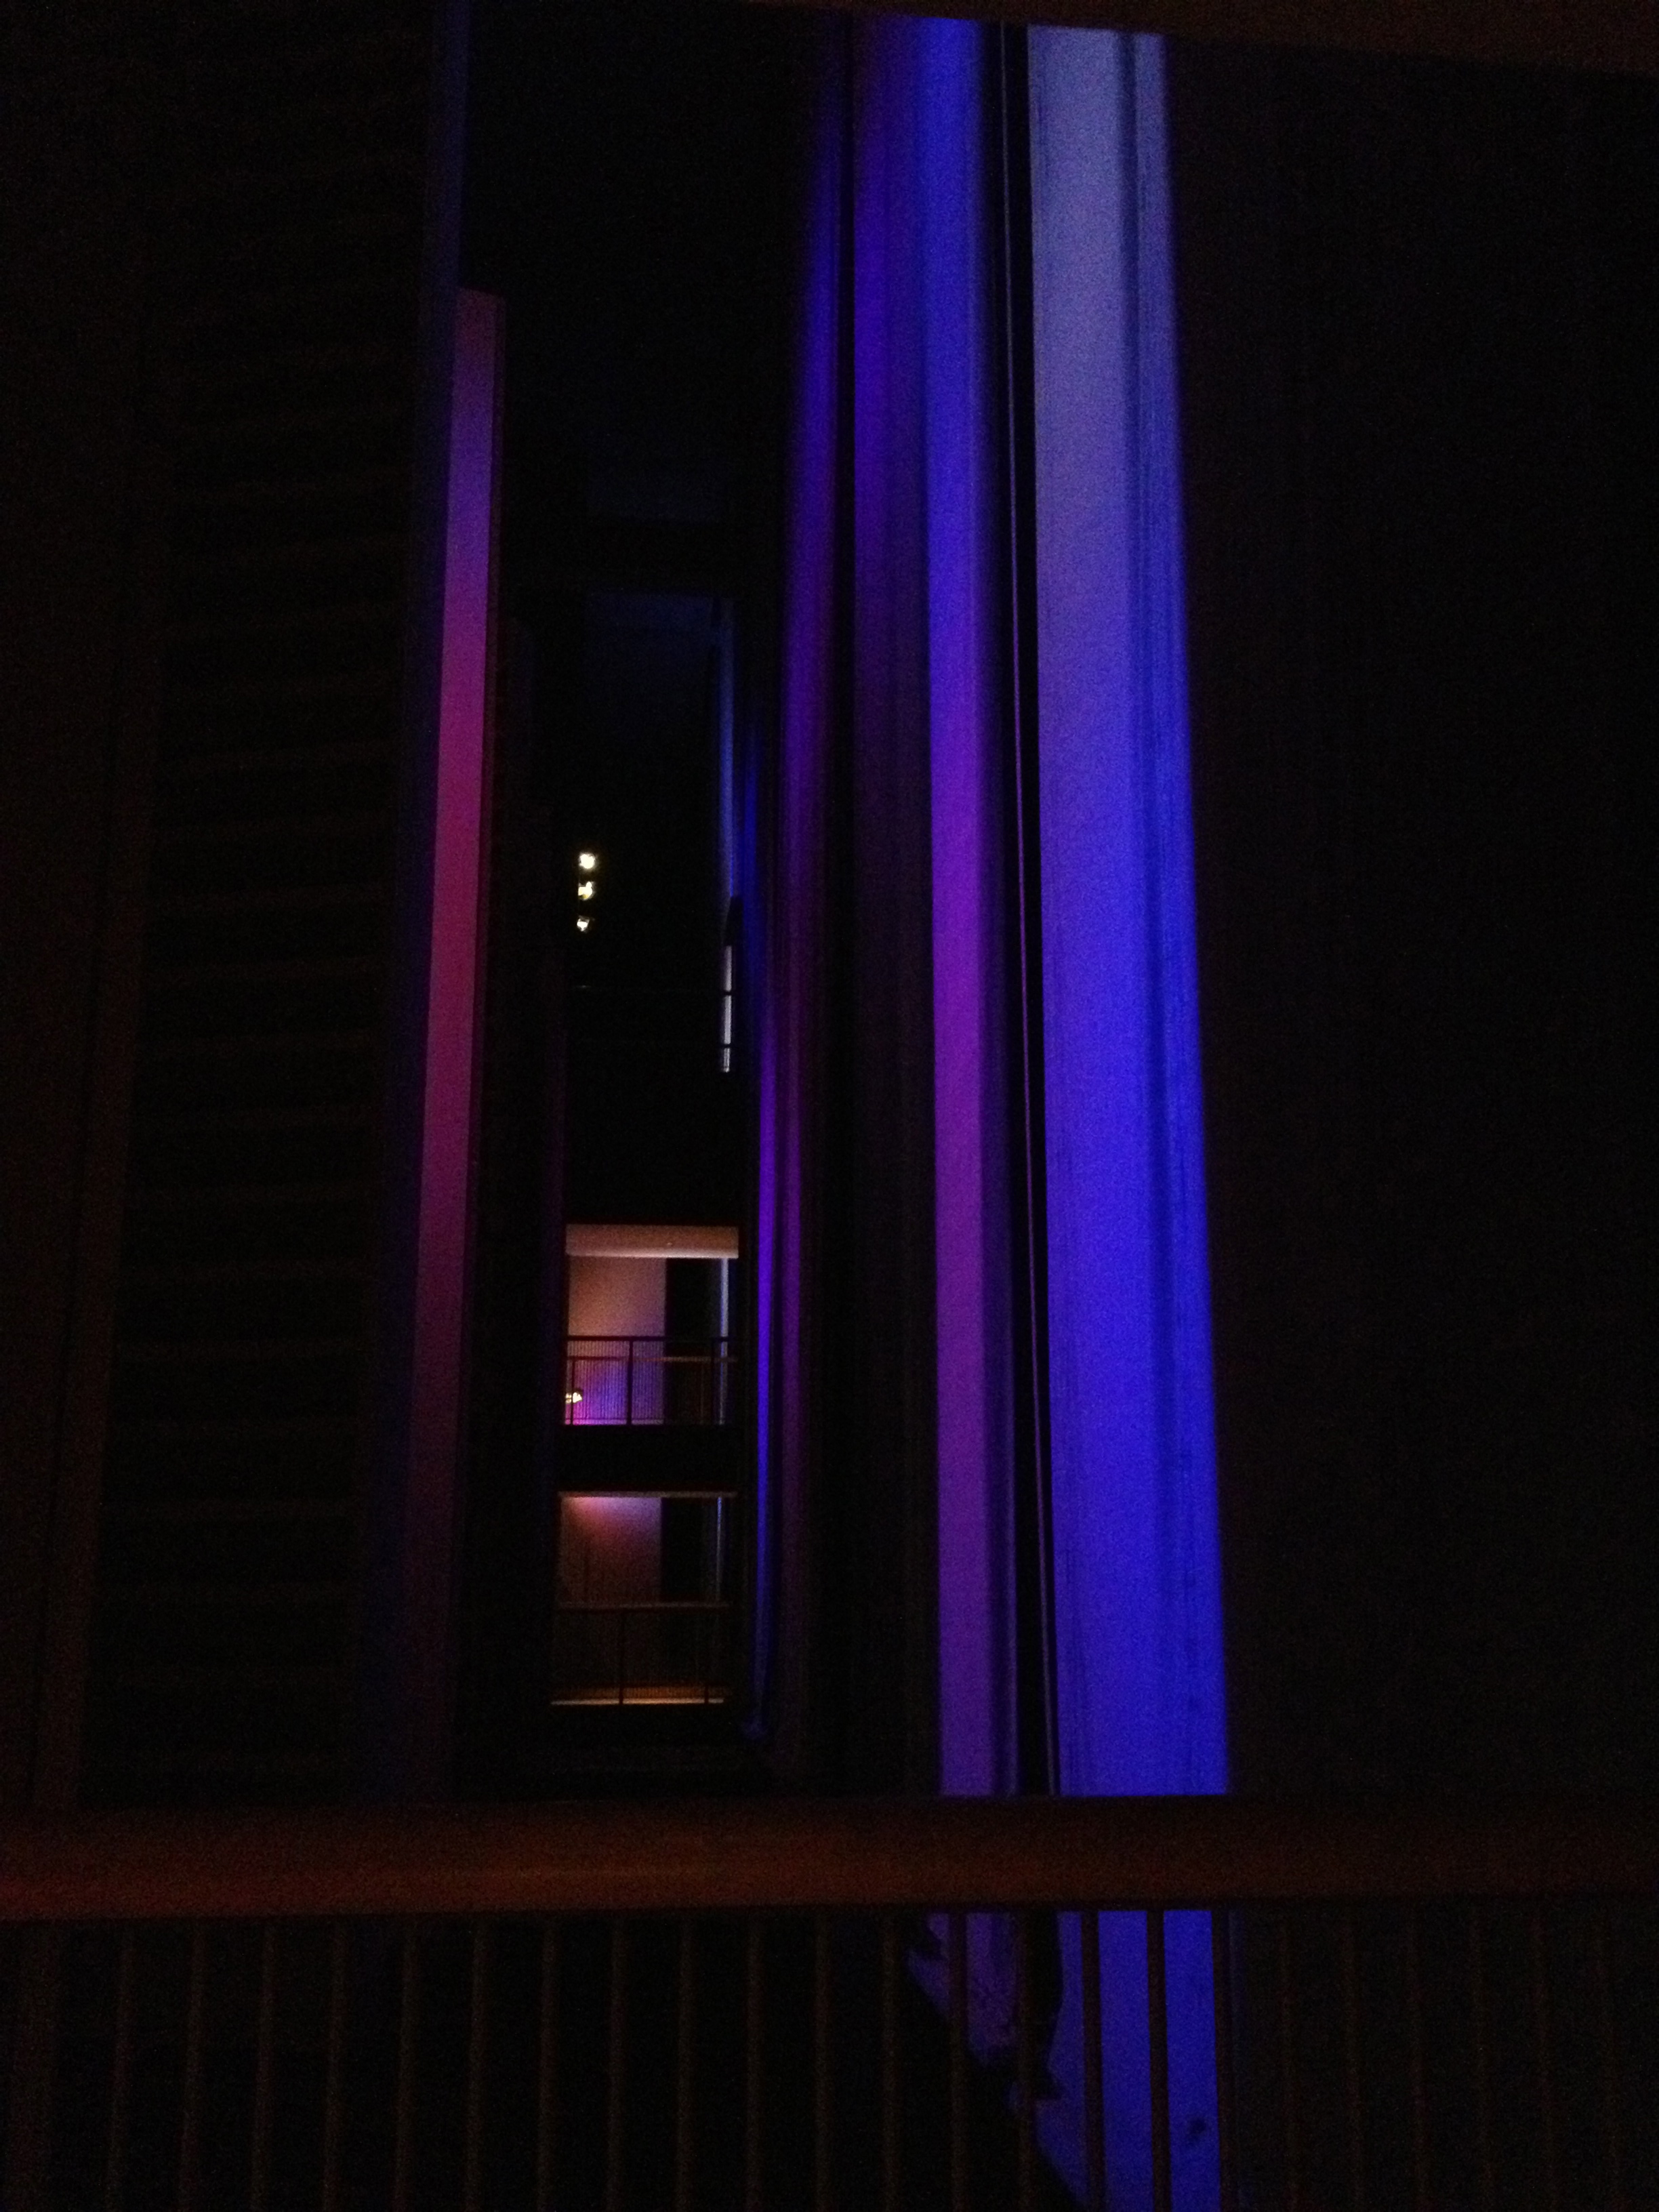 The John S. and James L. Knight Concert Hall's Reverberation Chambers (Photo by Emma Reyes).